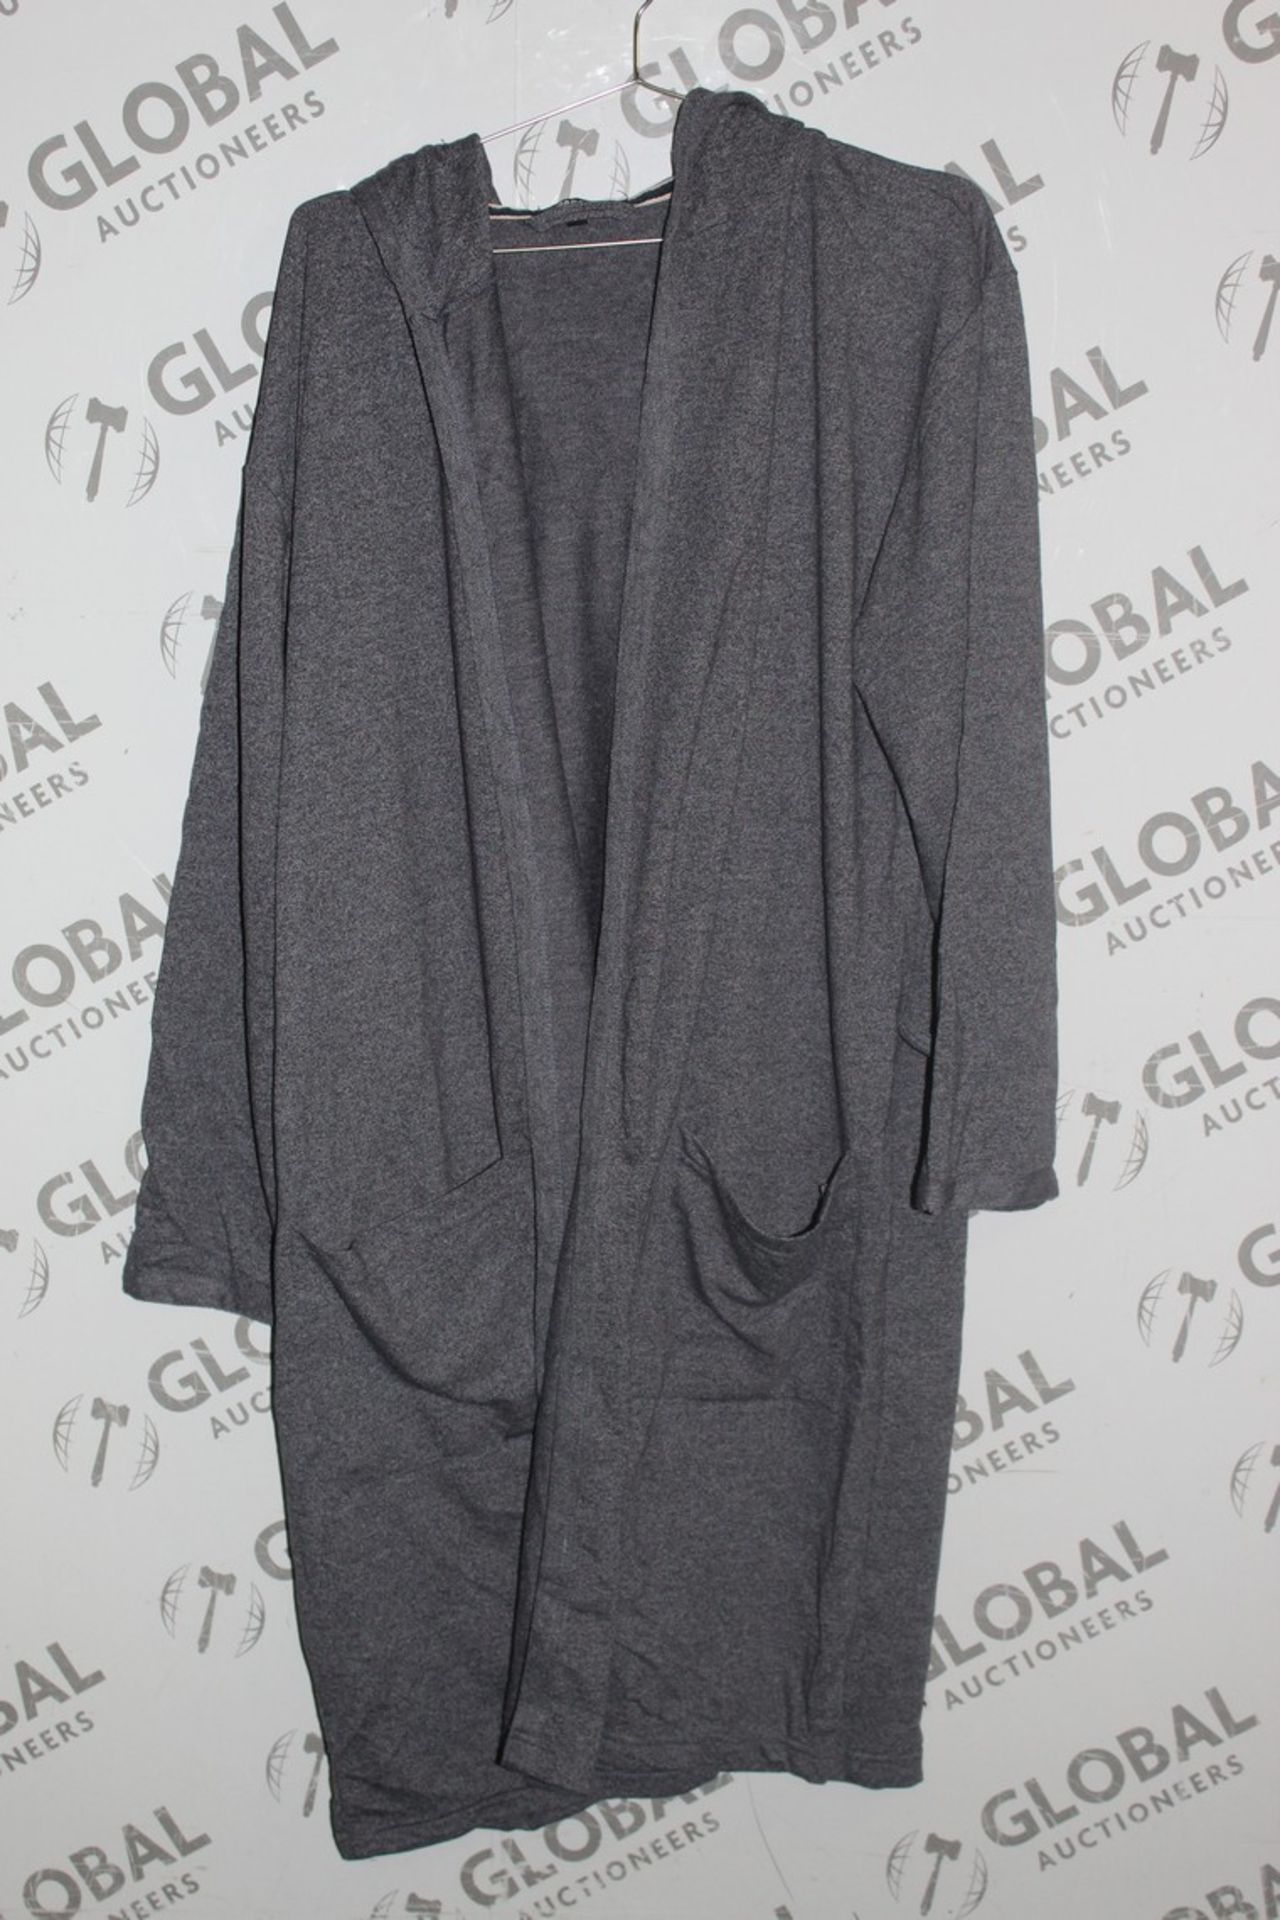 Box to Contain 12 Brand New Gents Grey Hooded Lounging Gowns